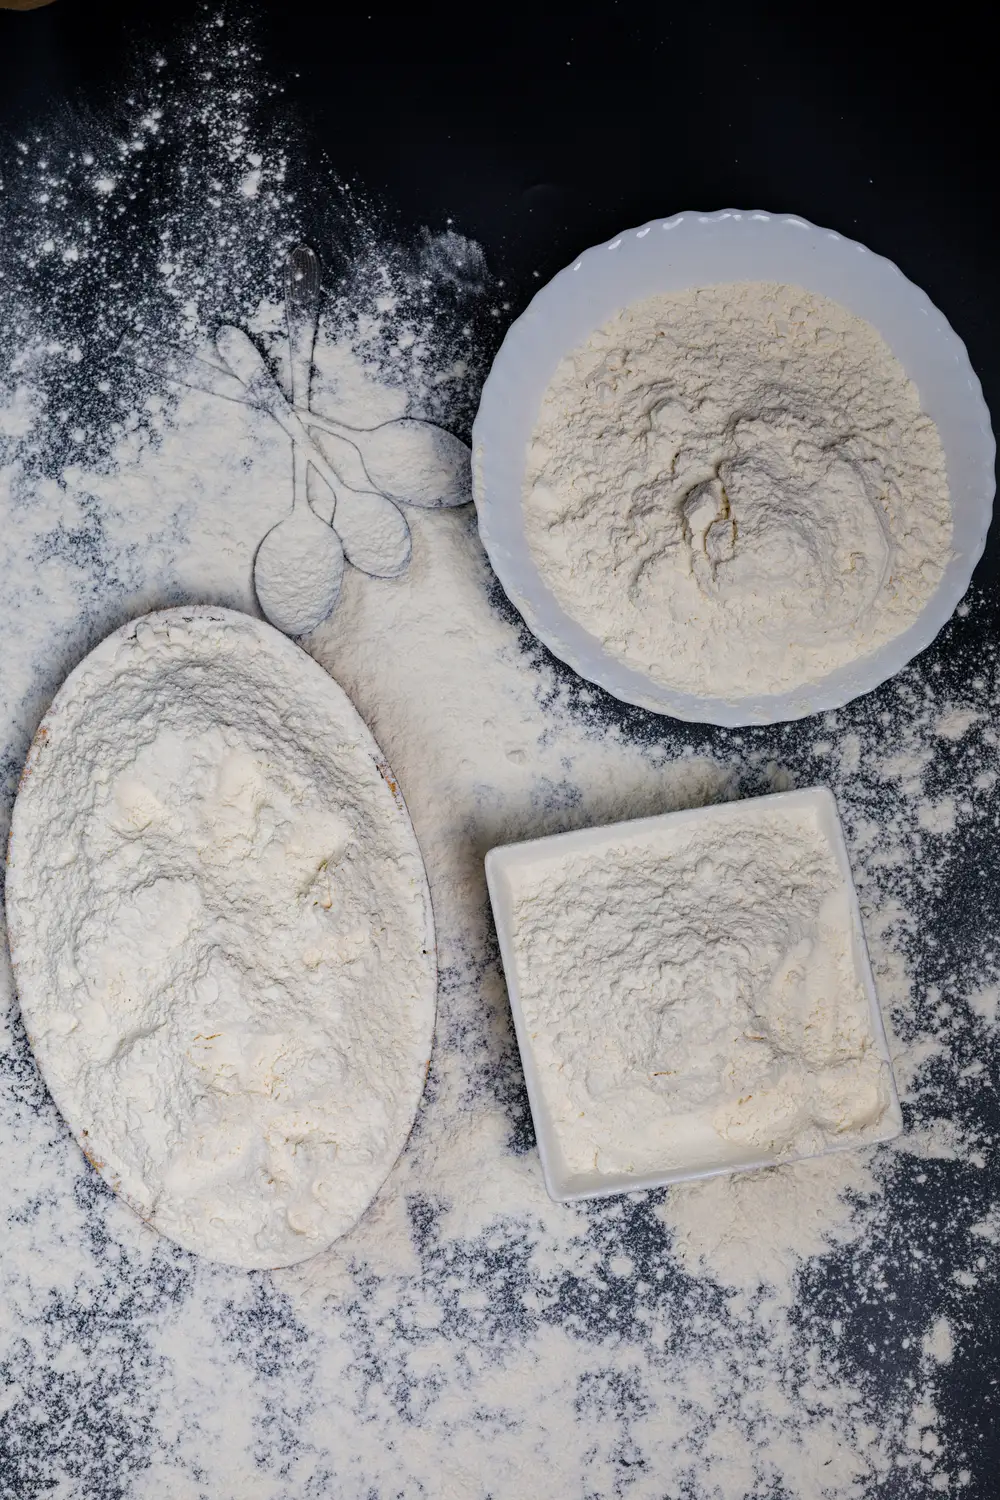 Different shapes of bowls of flour